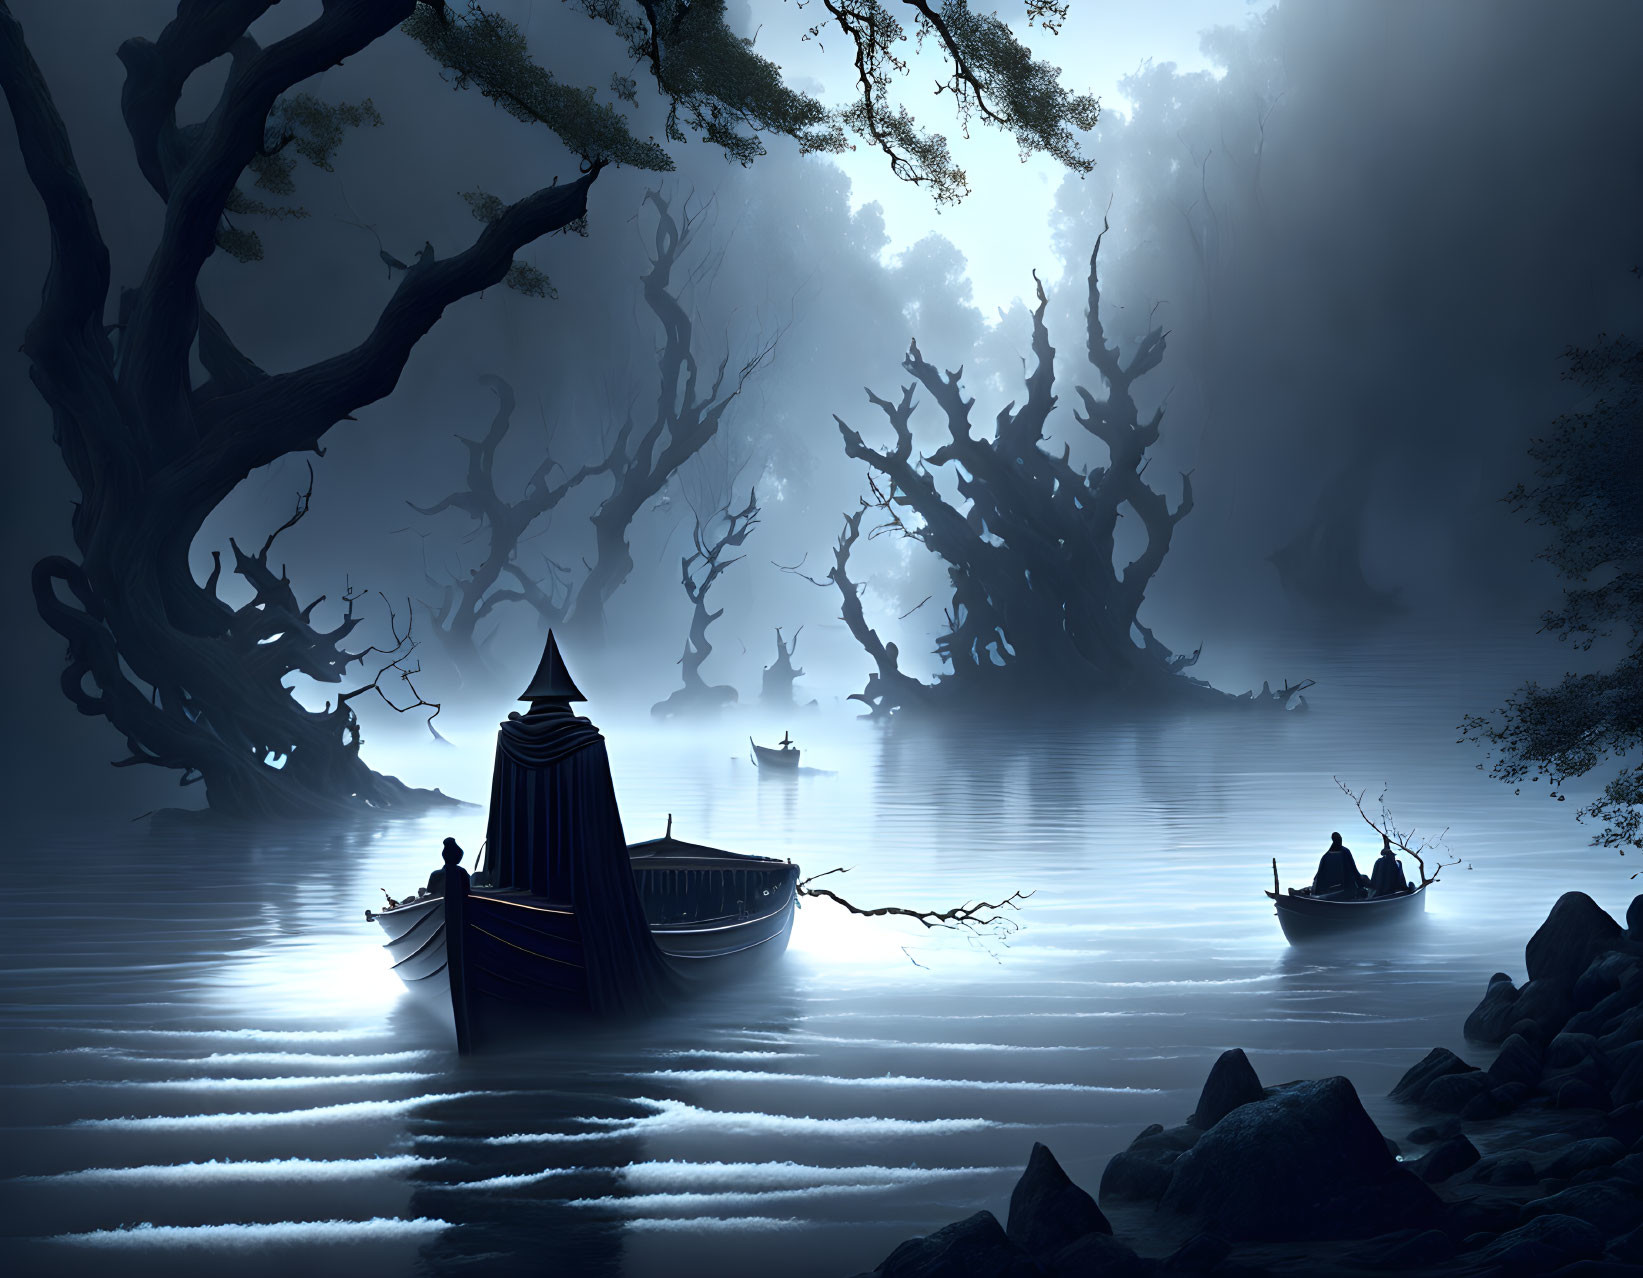 Mystical blue-toned forest with silhouetted figures on boats and ethereal trees in